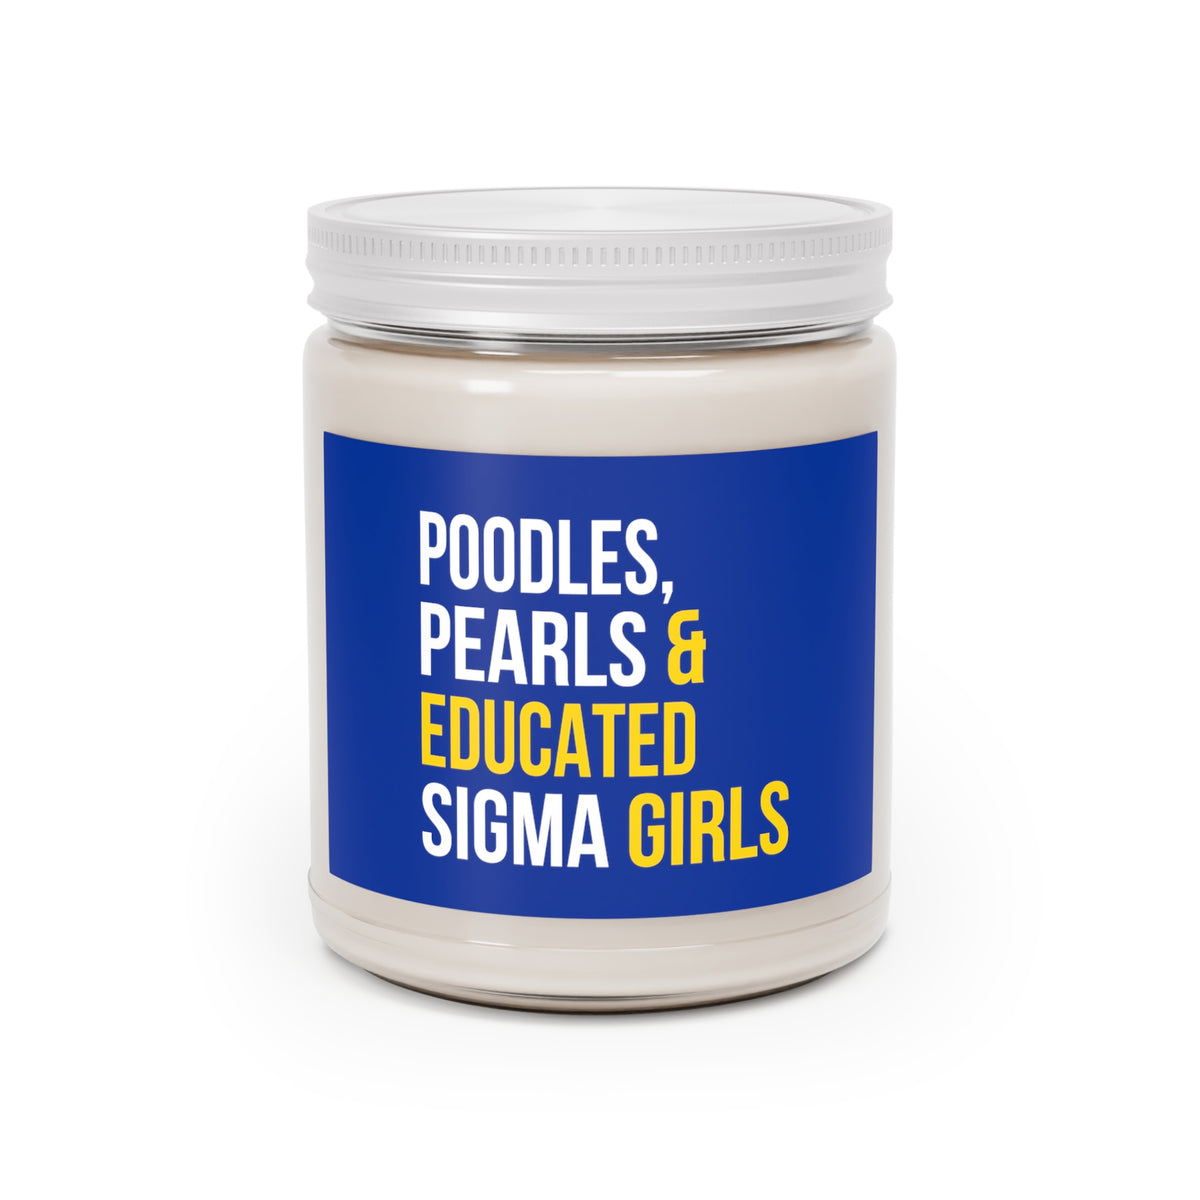 Poodles Pearls & Educated Sigma Girls Scented Candles